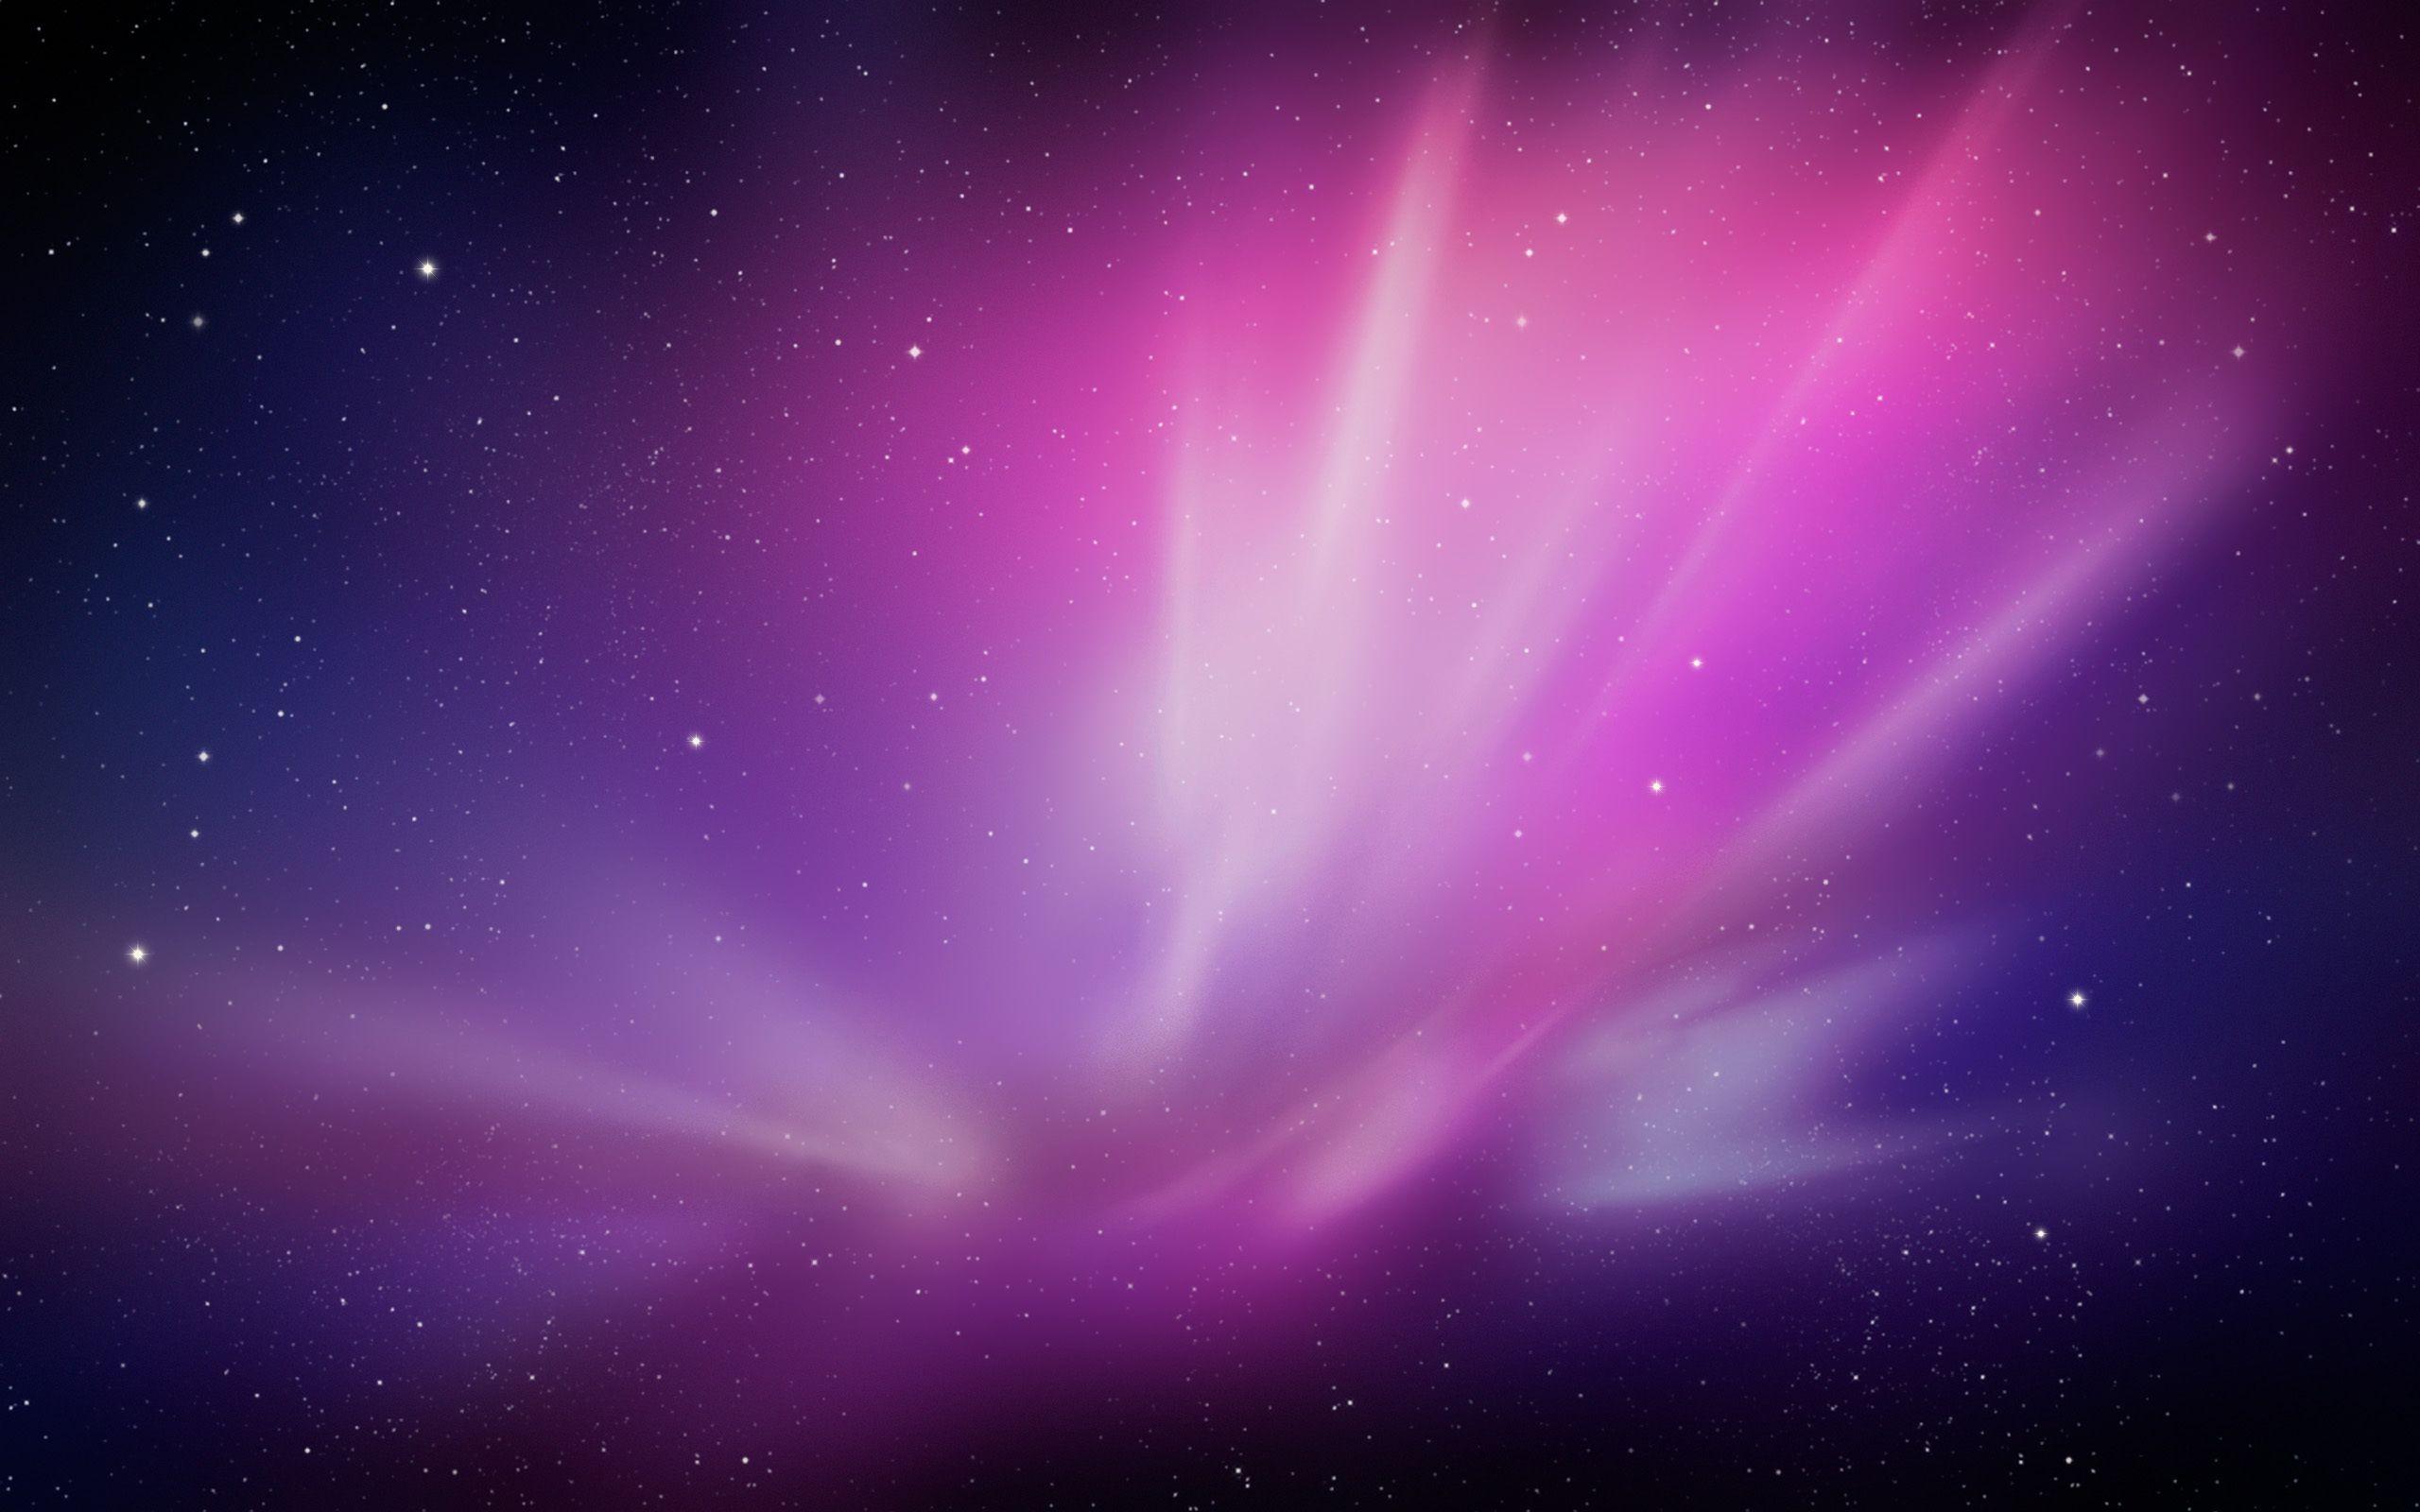 Free HD Galaxy Background Tumblr Image Download